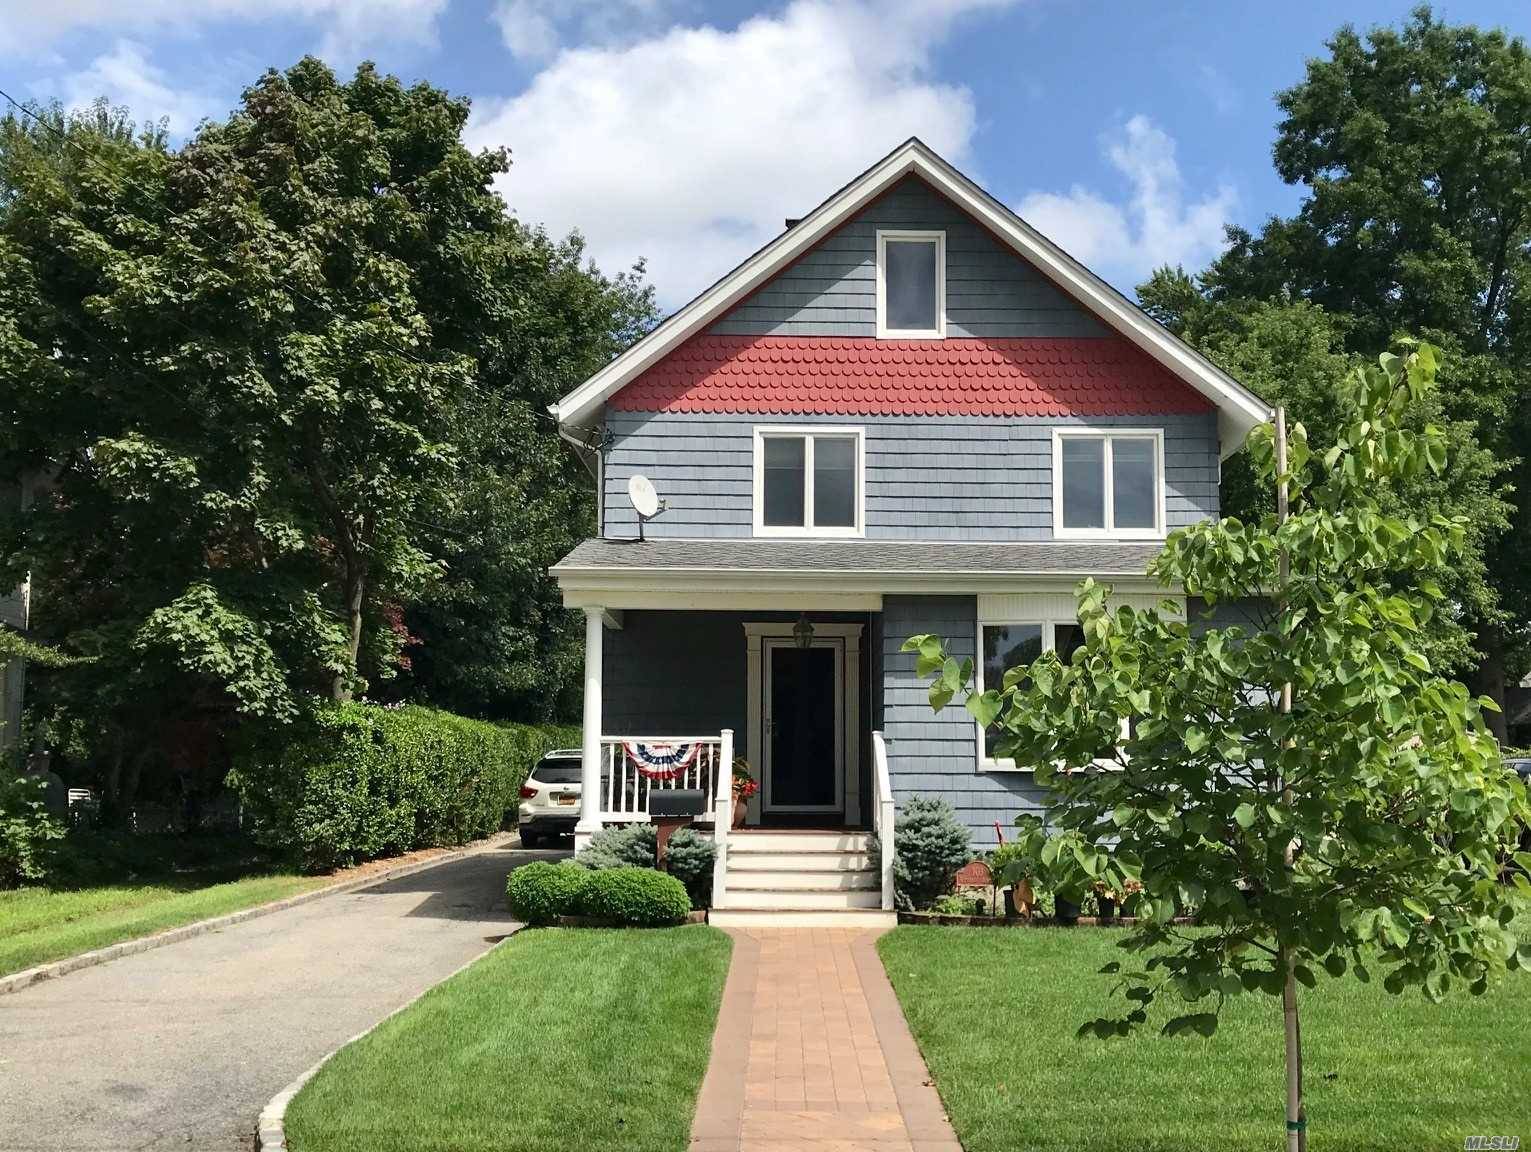 Amityville Village Colonial Situated Mid Block, Updates Include ; Electric Service, Vinyl Siding, Architectural Roof, Soffits, Leaders Gutters, Brick Walkway, Chimney, Water Heater, Recessed Lighting, Kitchen, Home Was Completely Redone ...